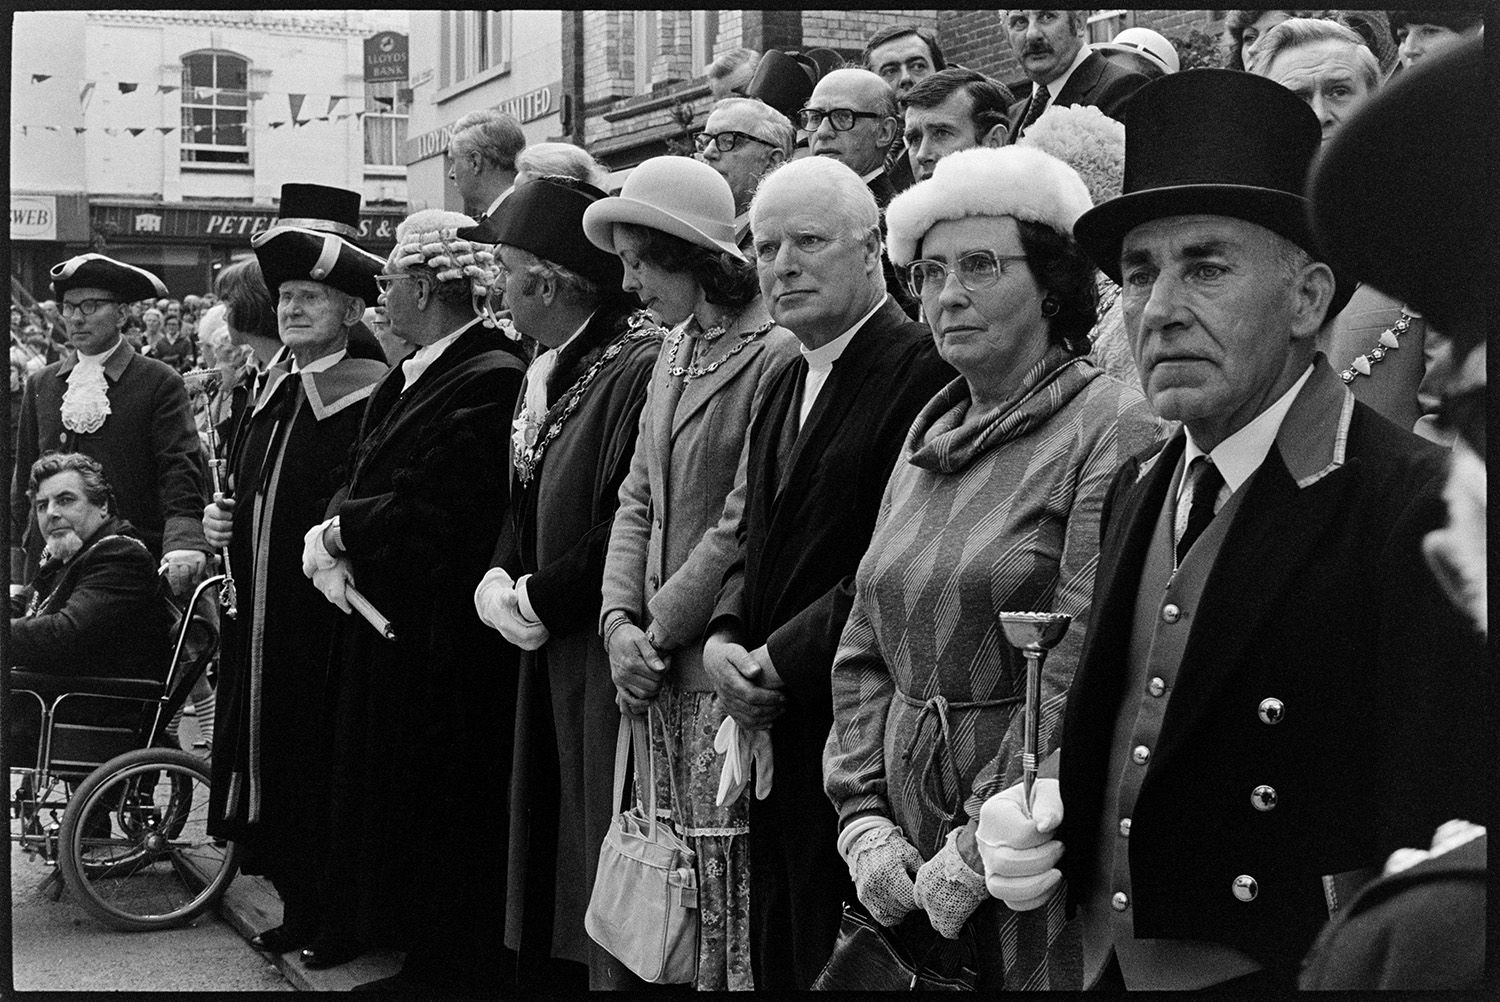 Mayors, wives and dignitaries in square looking at Mayfair parade. 
[Mayors, dignitaries and wives in Torrington square, watching the Mayfair parade. Dr Cramp is wearing his mayoral chain of office and a bicorne hat. A man in the foreground is wearing a top hat.]